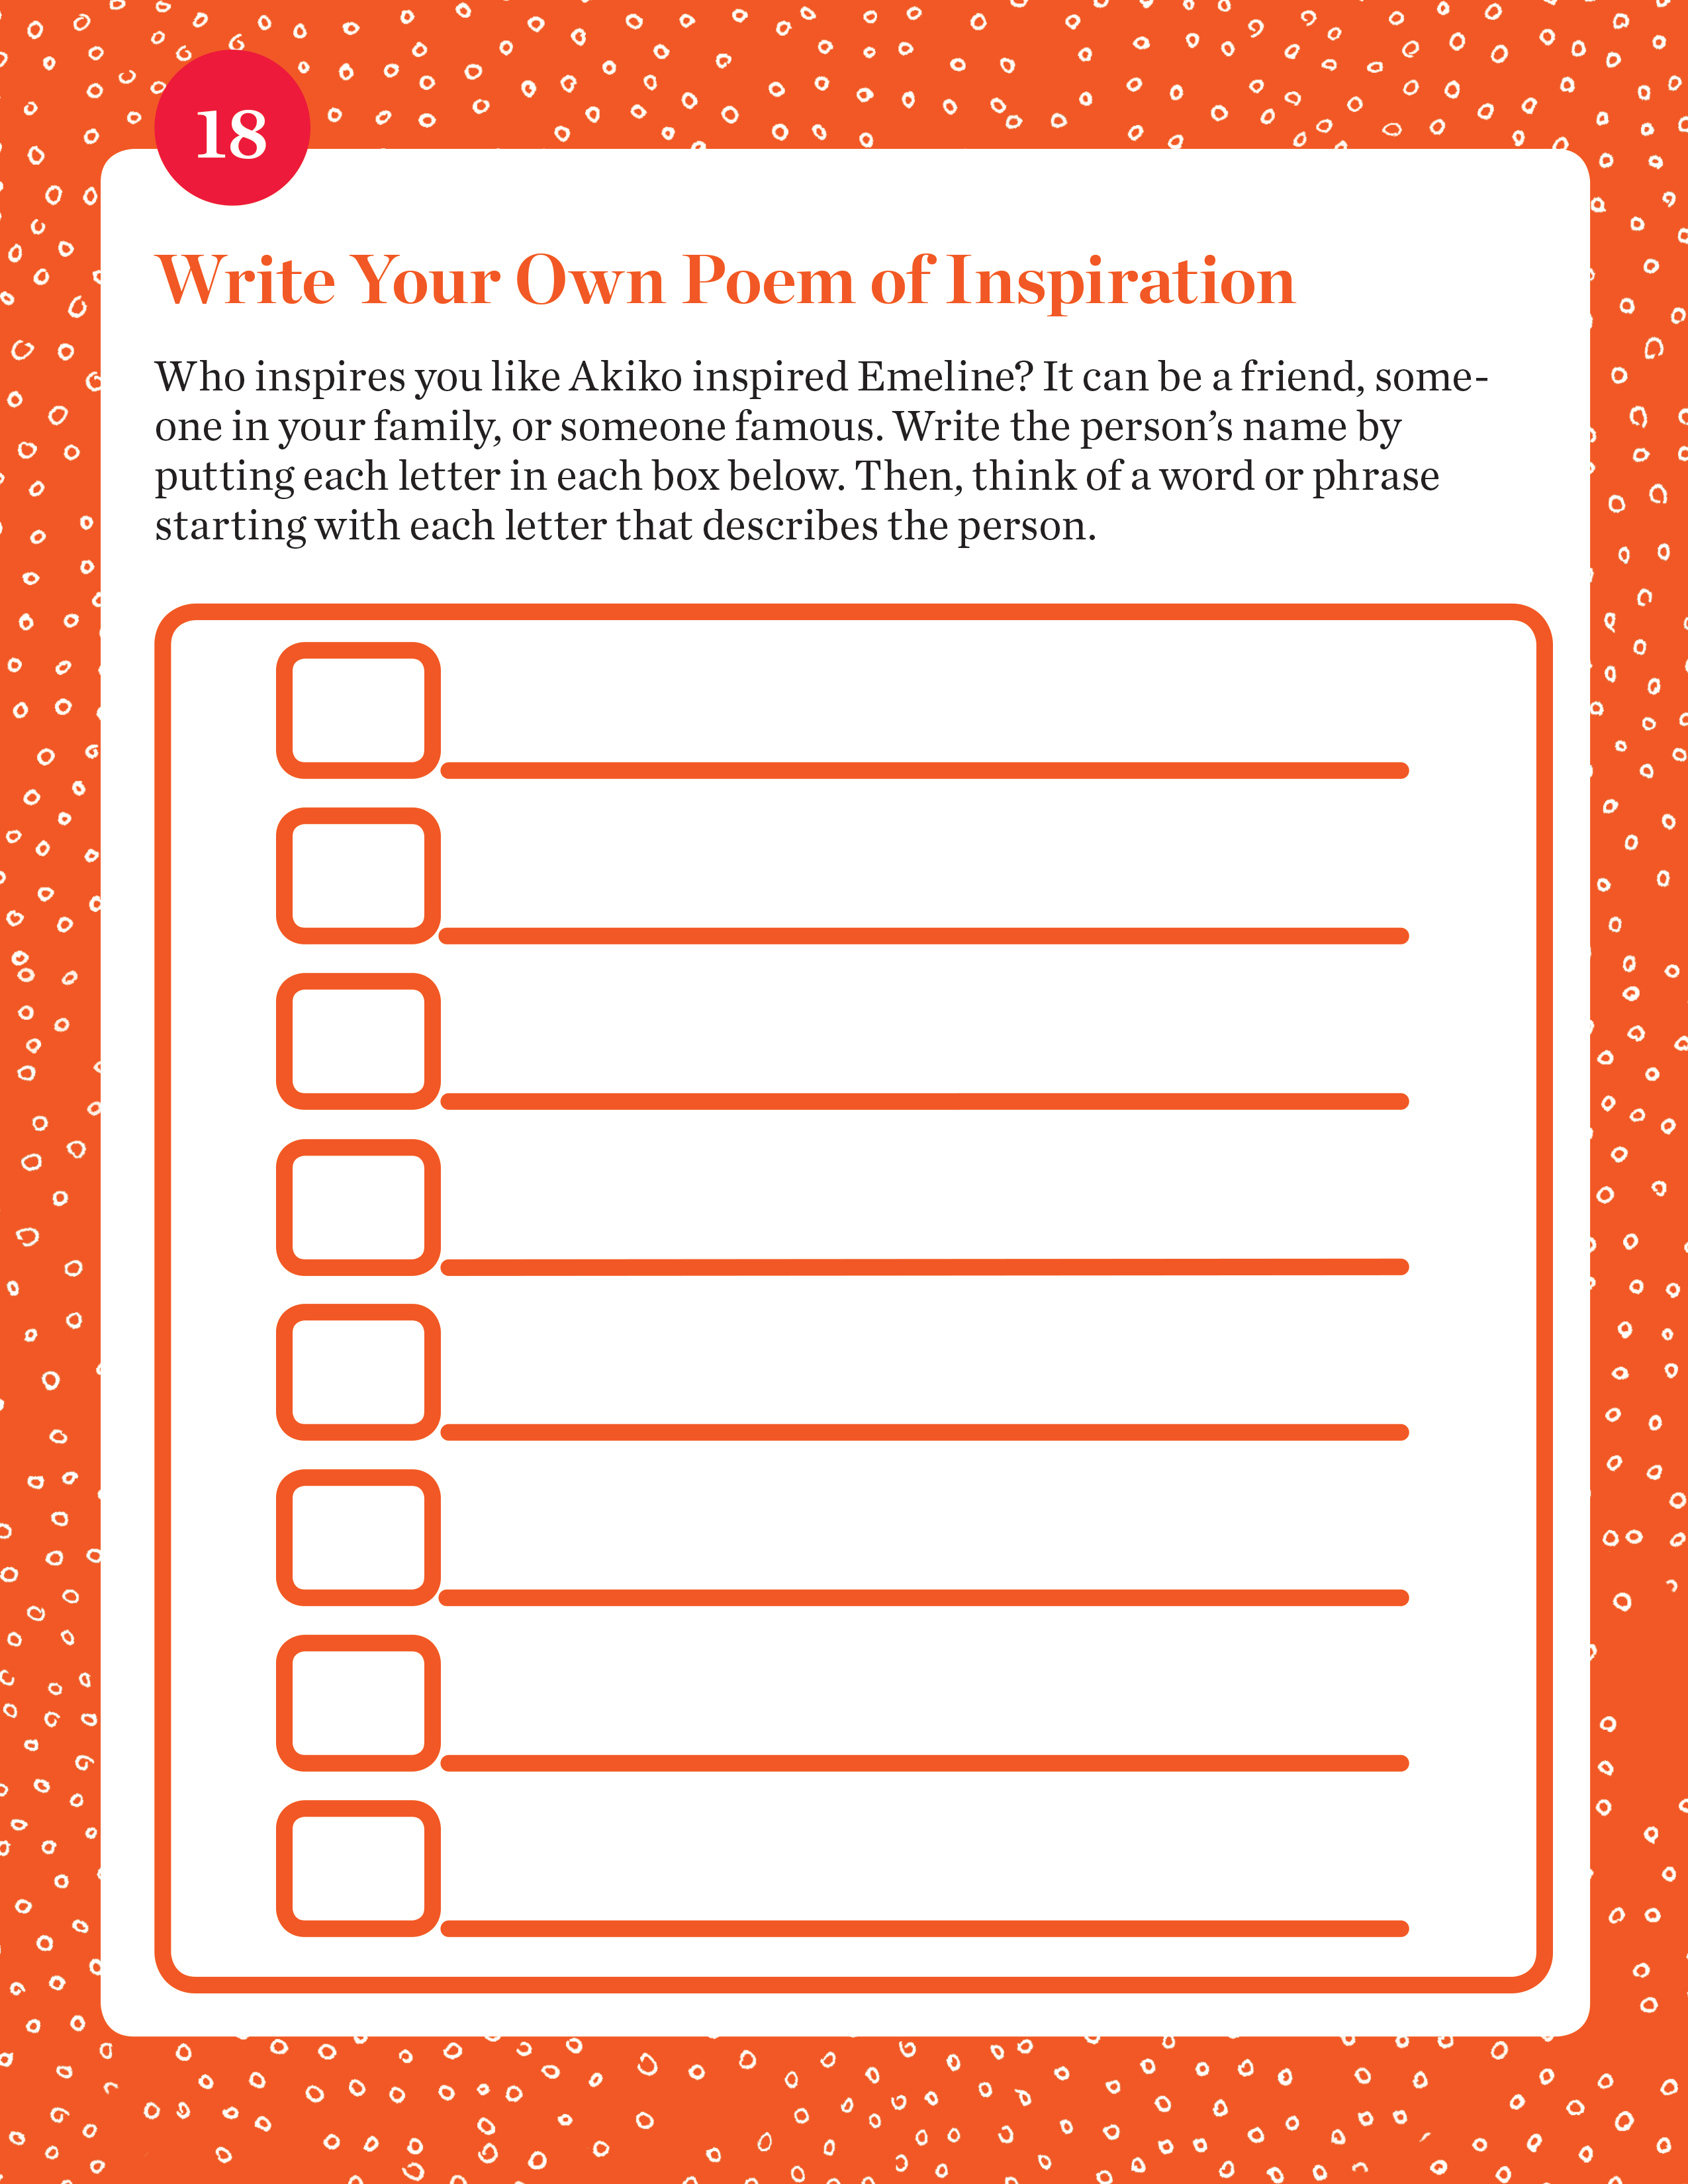 Write Your Own Poem of Inspiration